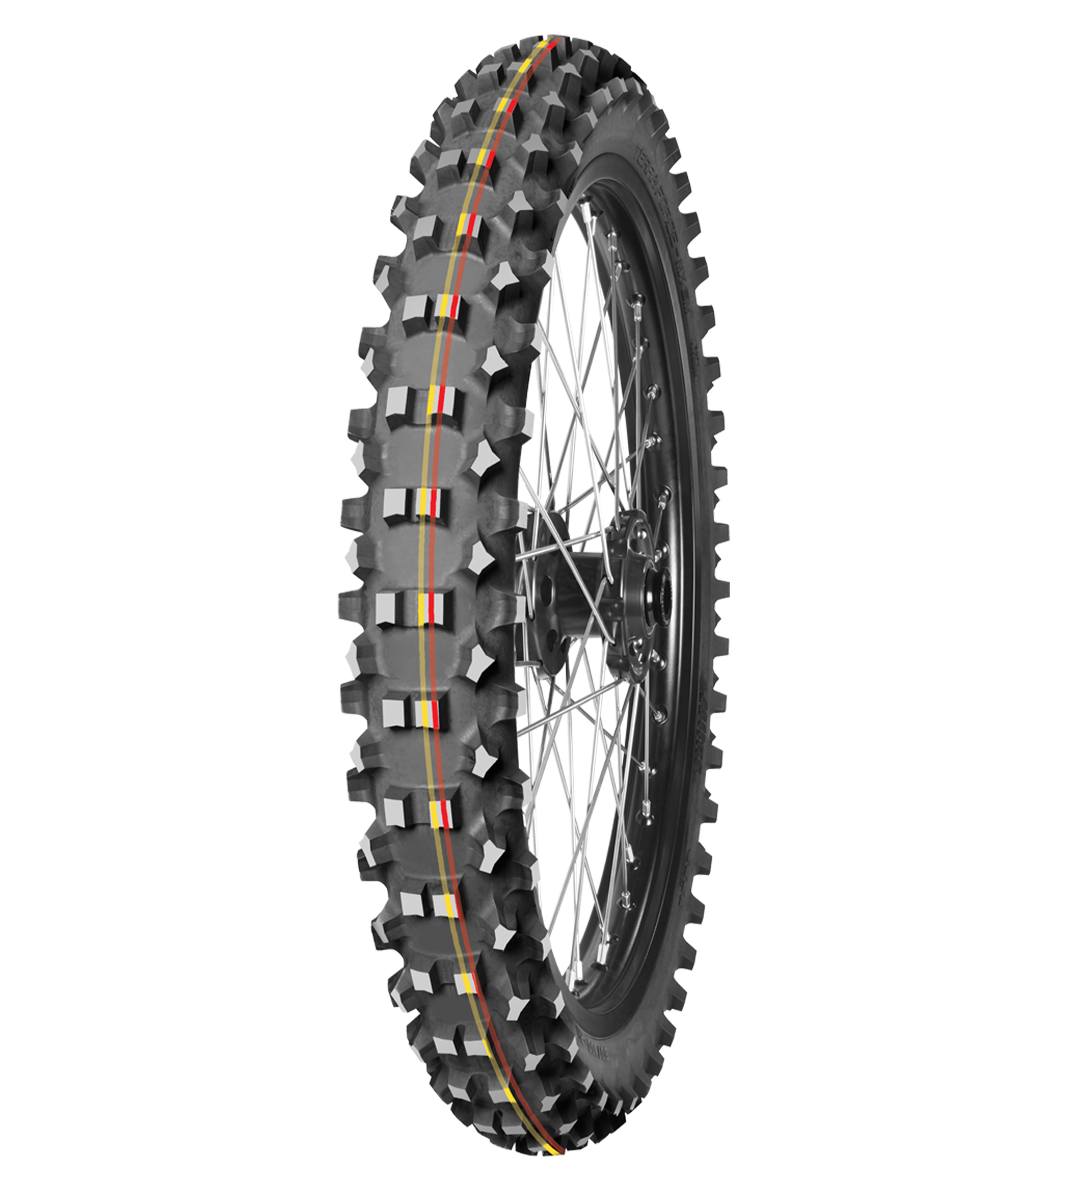 Mitas TERRA FORCE-MX SM 60/100-12 Motocross Competition Off-Road SOFT TO MEDIUM 36J Red & Yellow Tube Front Tire, 226037, 60/100-12, Front, Motocross, Motocross Competition, Off-Road, Terra Force, Terra Force-MX SM, Trail, Tires - Imported and distributed in North & South America by Lindeco Genuine Powersports - Premier Powersports Equipment and Accessories for Motorcycle Enthusiasts, Professional Riders and Dealers.